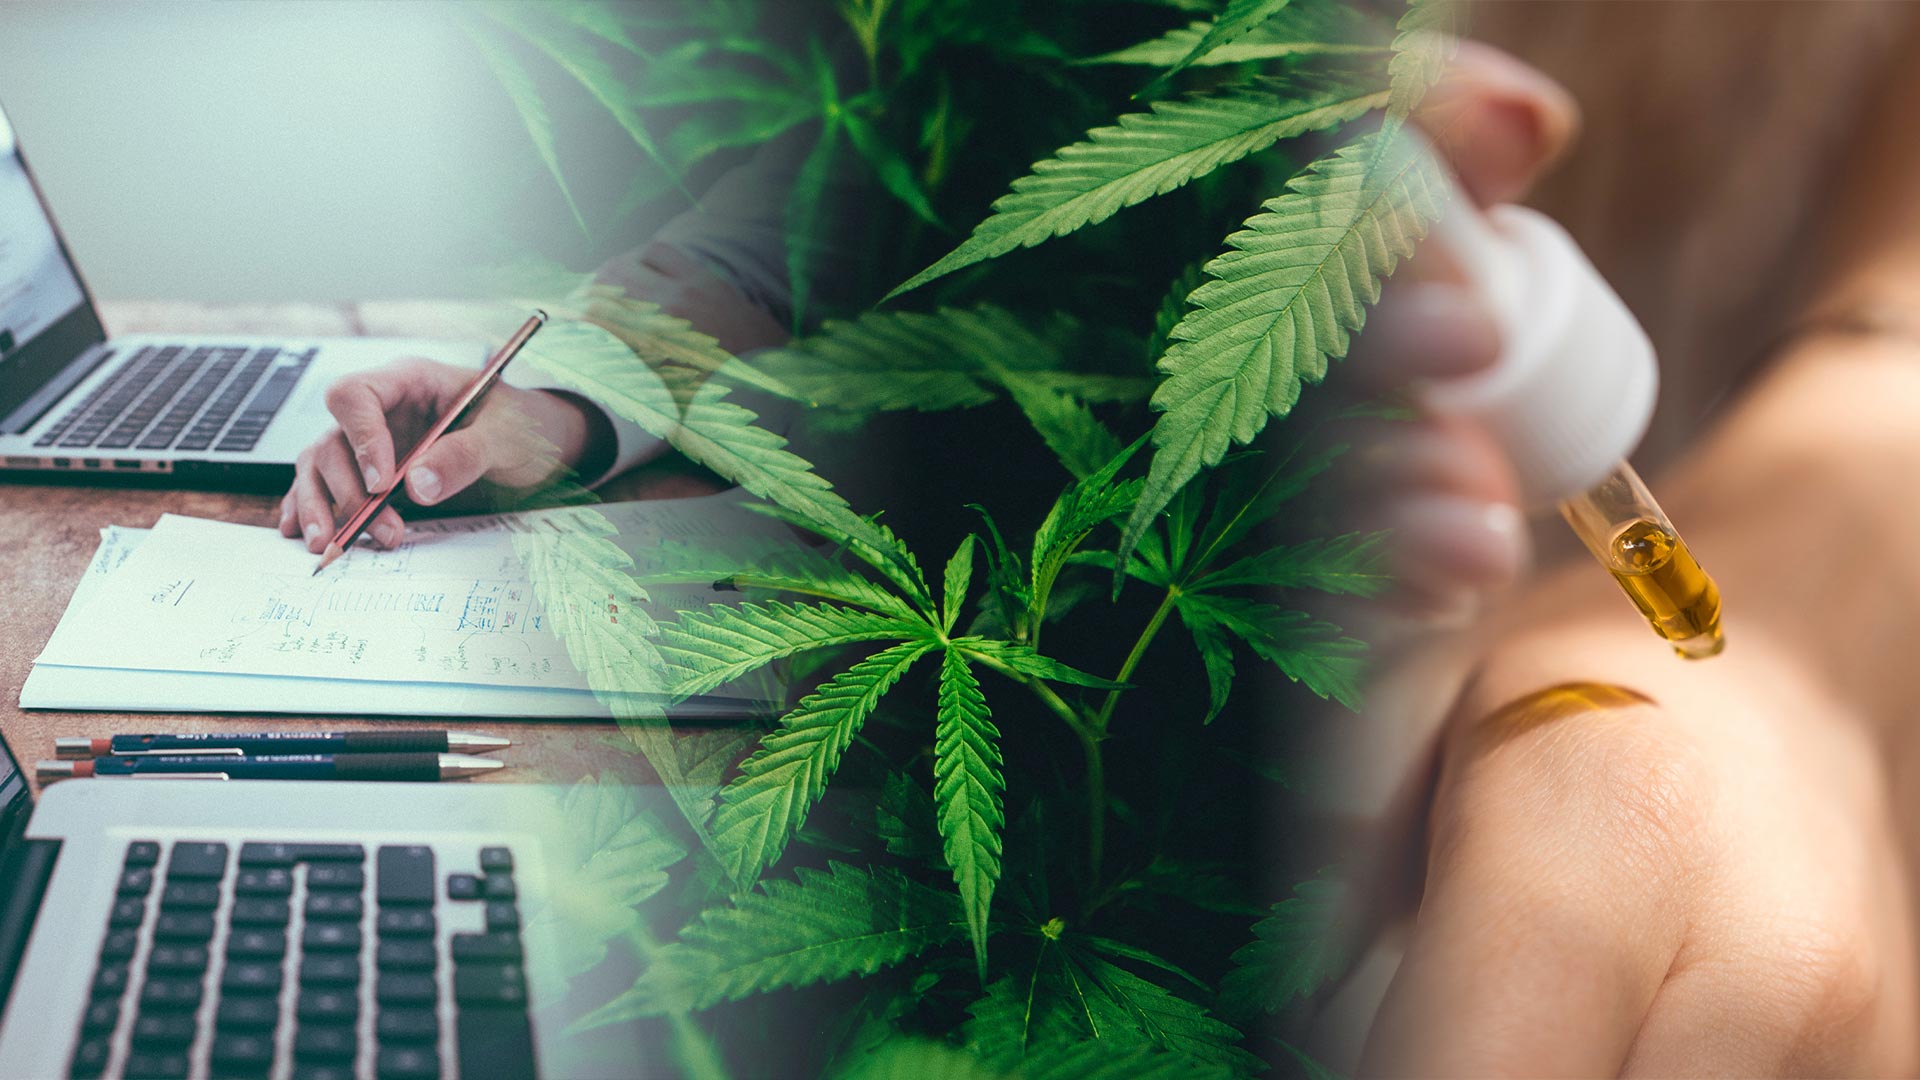 A closeup of two people working near laptops, a picture of cannabis plants, and a closeup of a person using a dropper with liquid in it